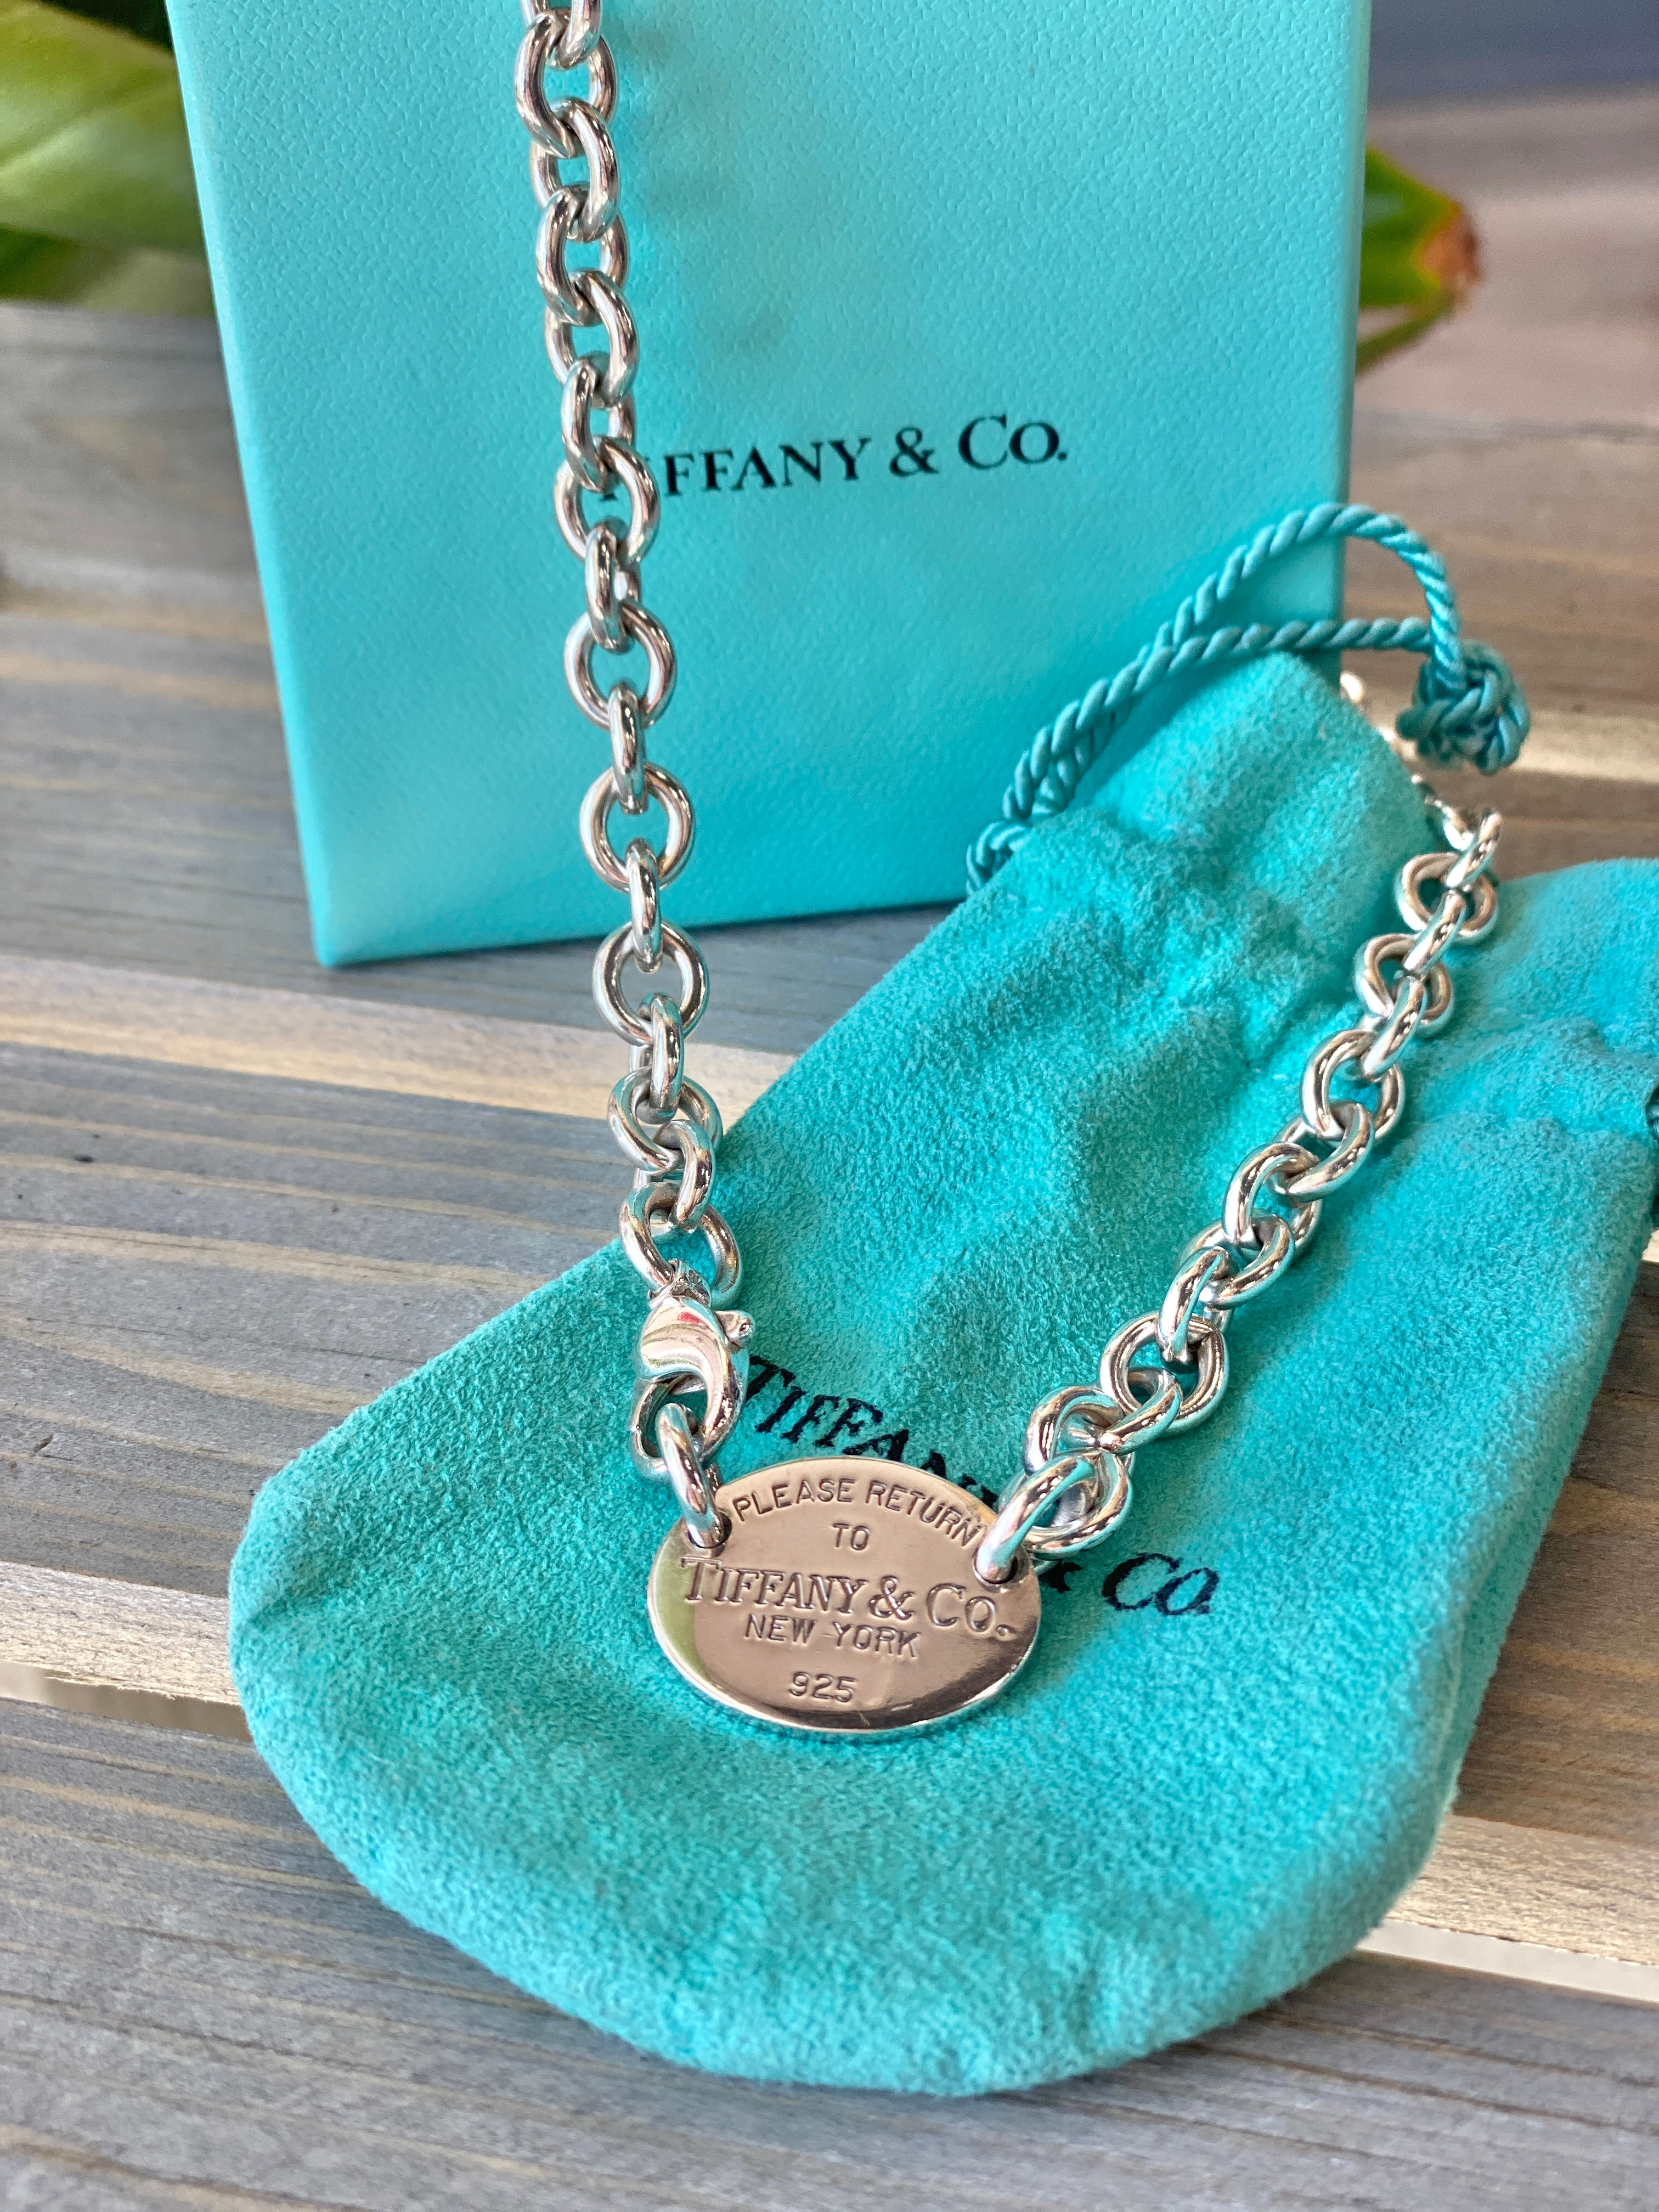 tiffany oval tag necklace